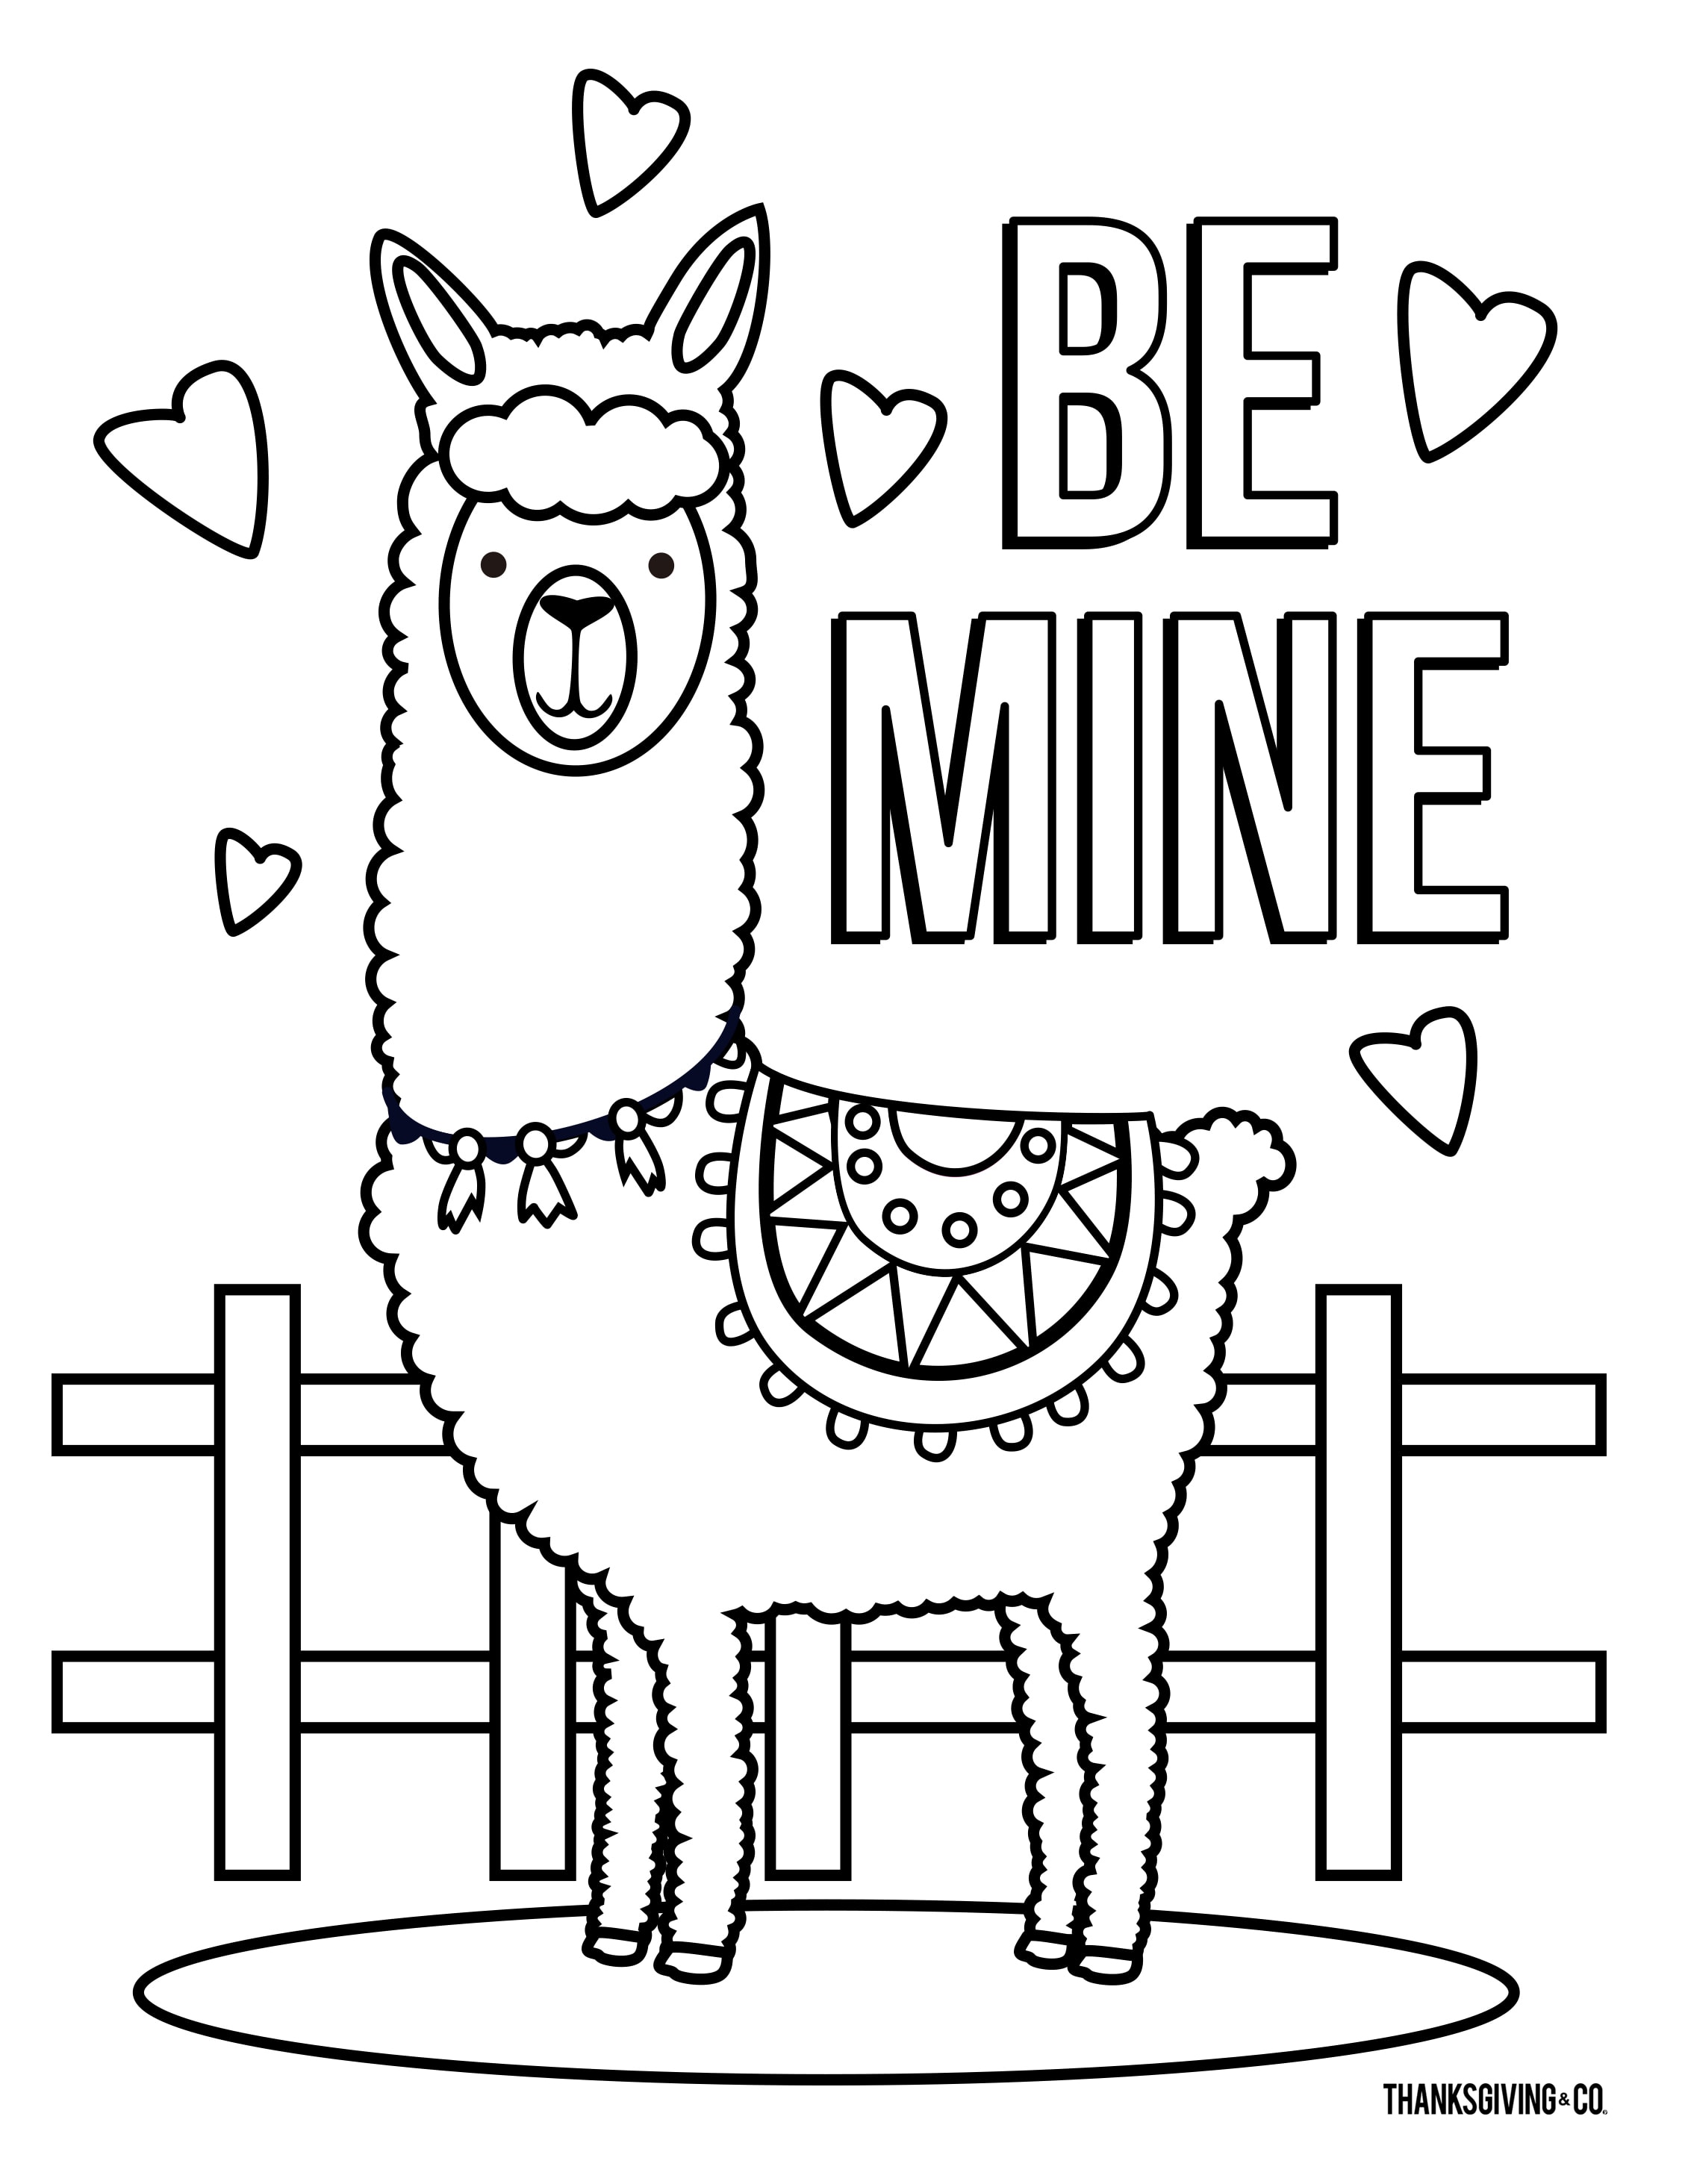 4 free Valentine's Day coloring pages for kids